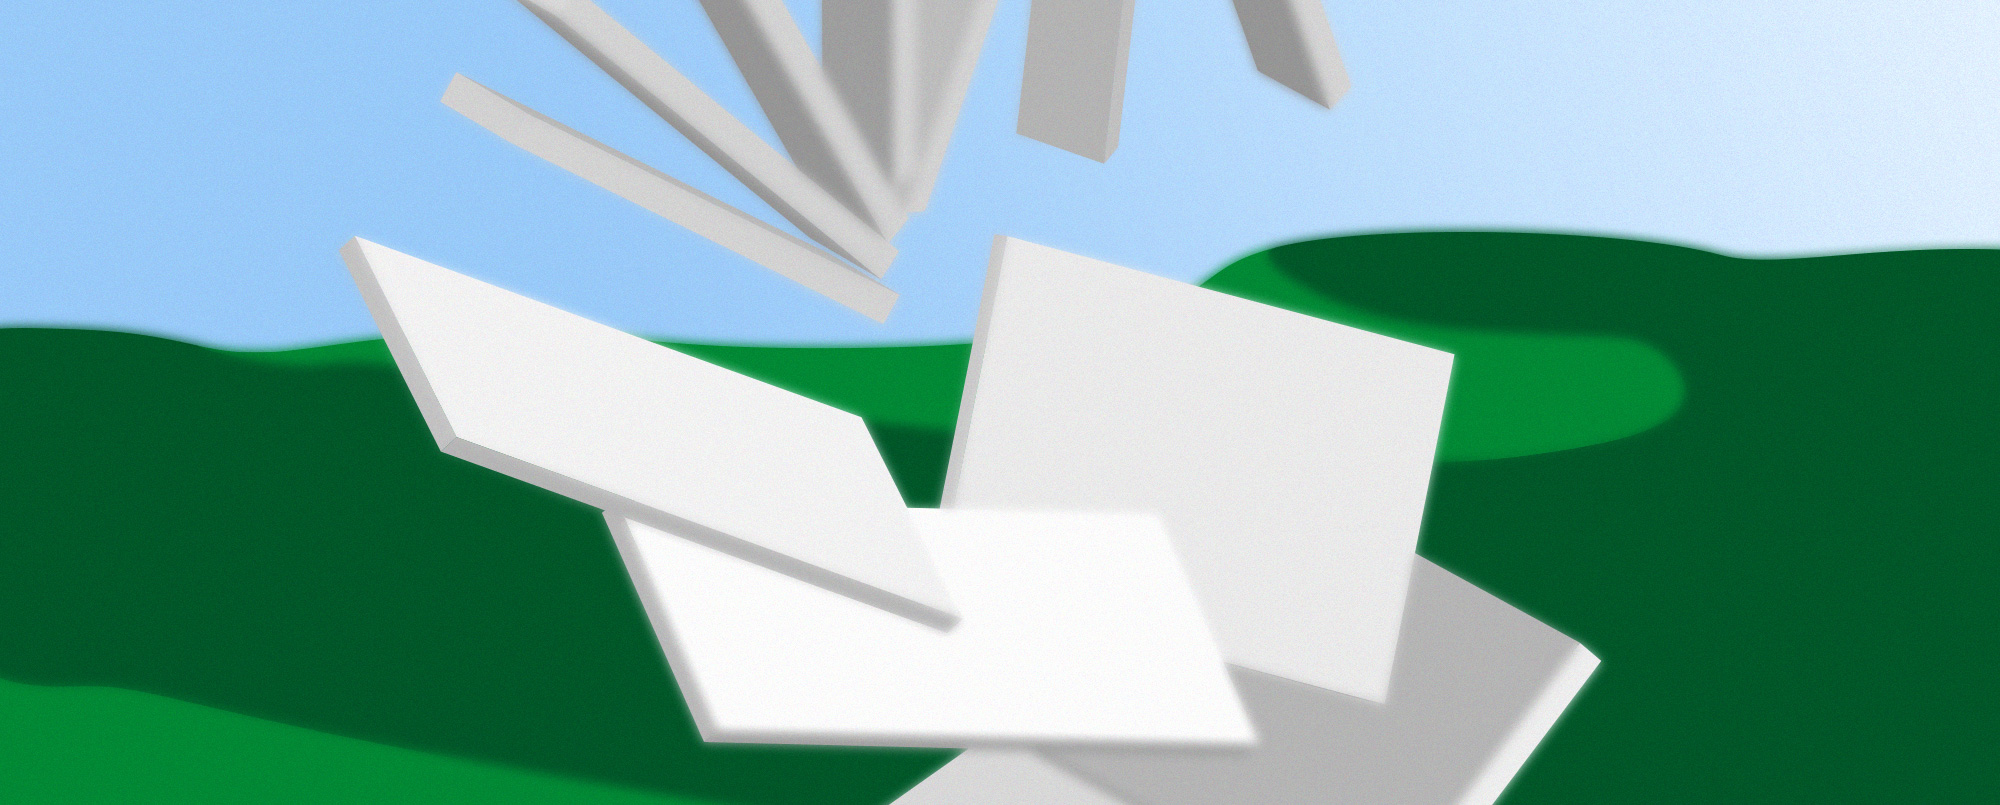 Rendering of white planes on a landscape